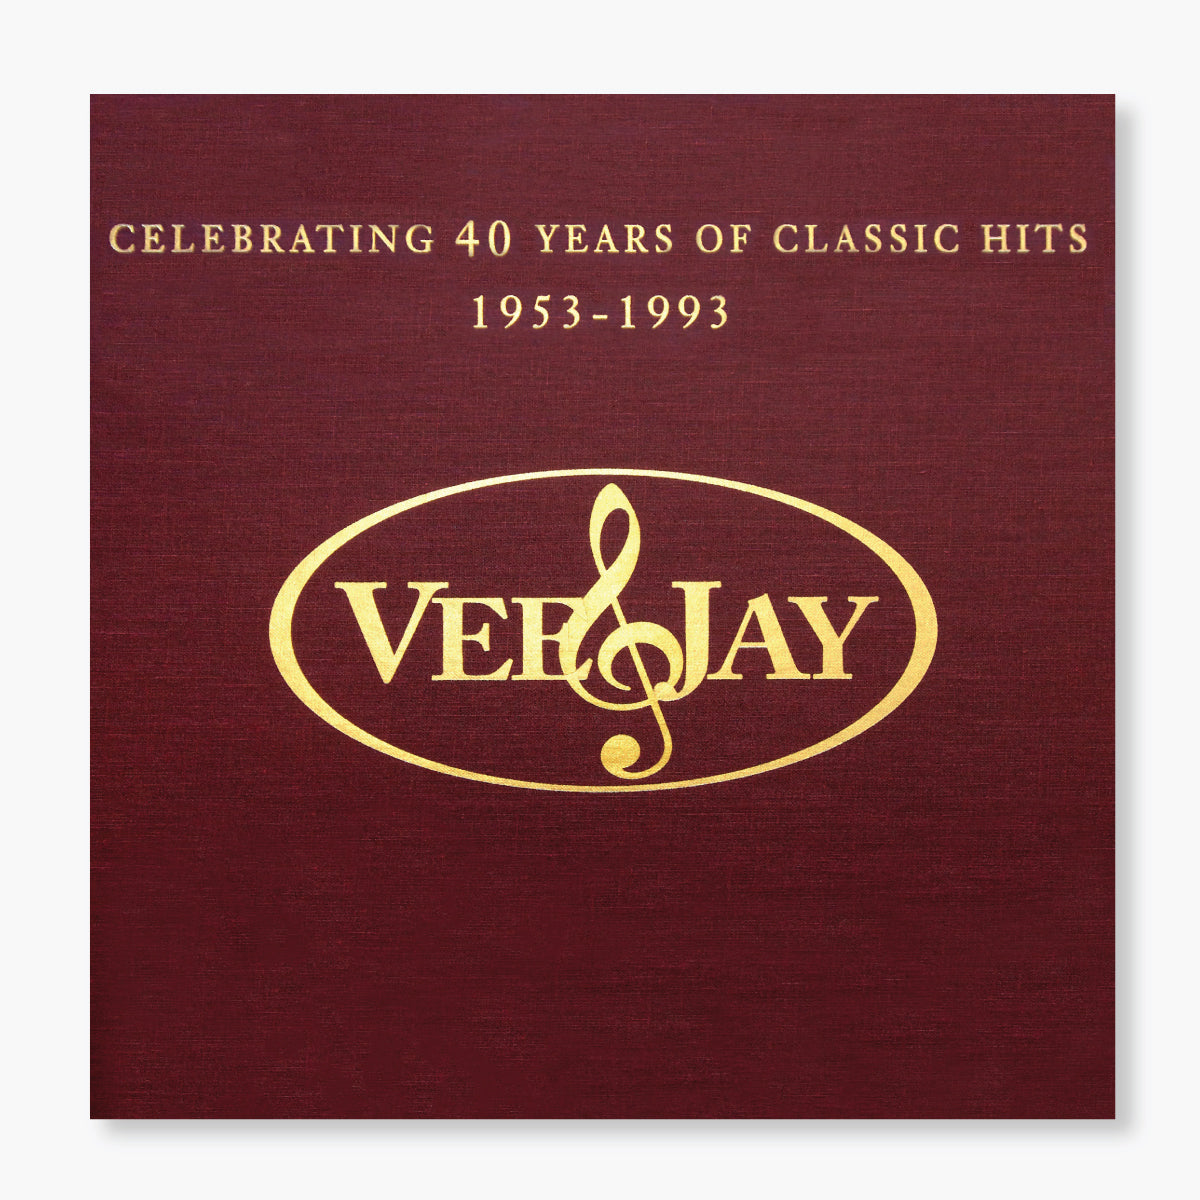 The Vee-Jay Story: Celebrating 40 Years Of Classic Hits (Box Set - 3-CD + 7&quot; Red Vinyl)